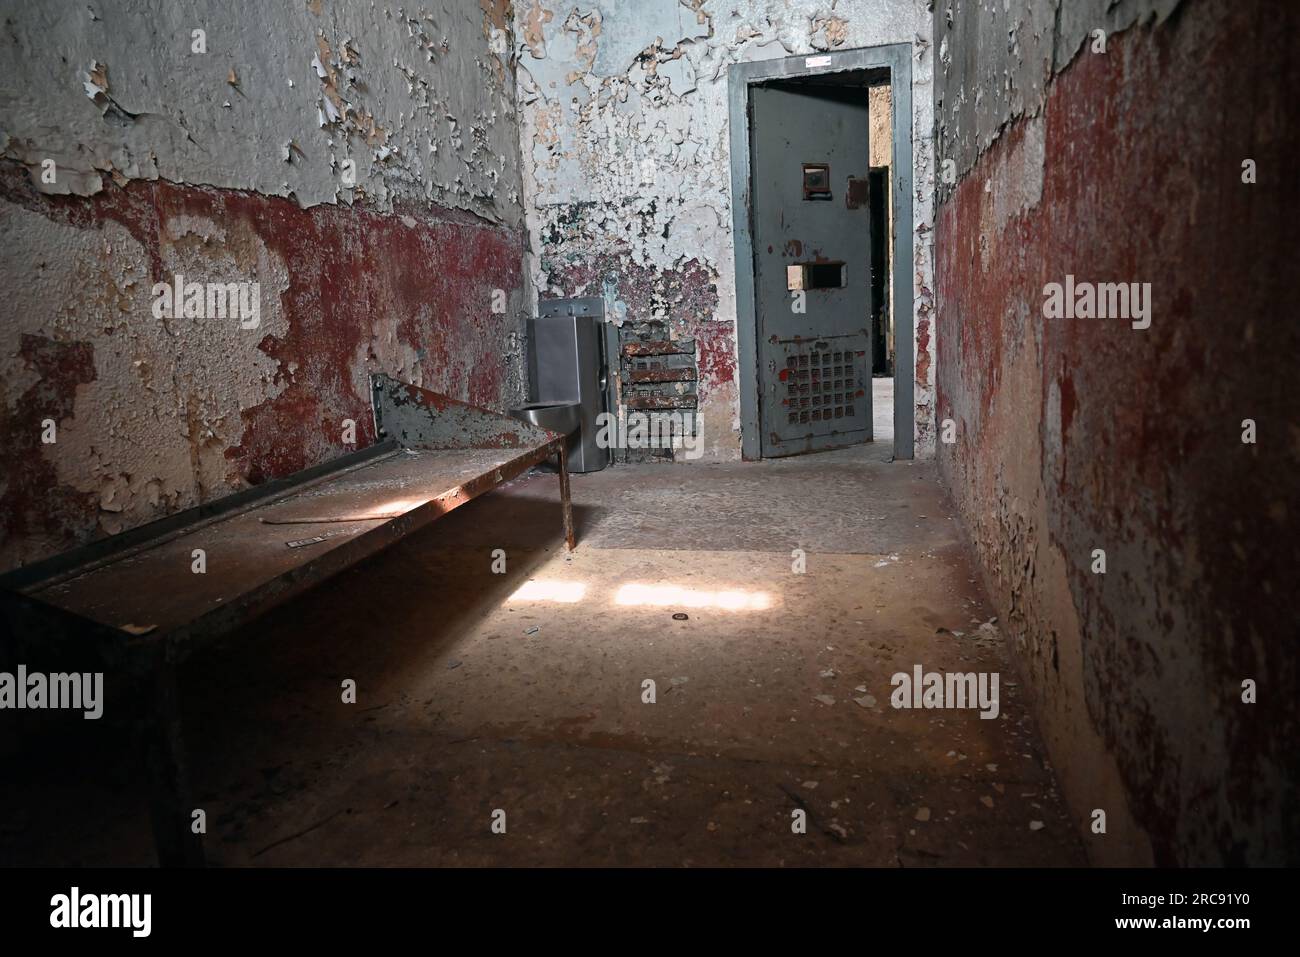 One of the isolation cells, also known as the tombs, at the Old Joliet Prison, which was opened in 1858 and closed in 2002. Stock Photo